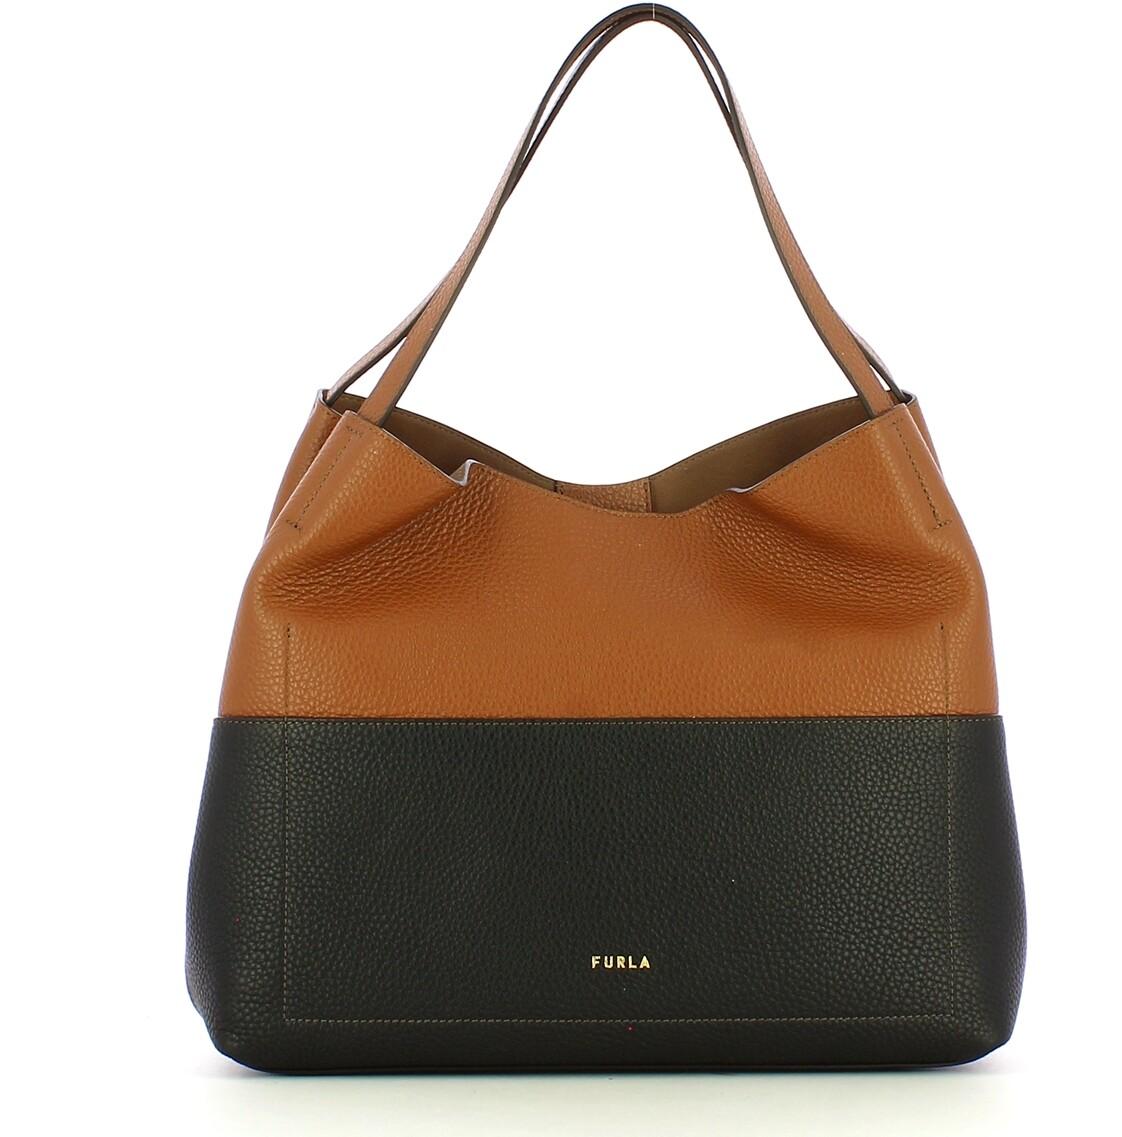 Furla - Authenticated Handbag - Leather Brown Plain for Women, Very Good Condition